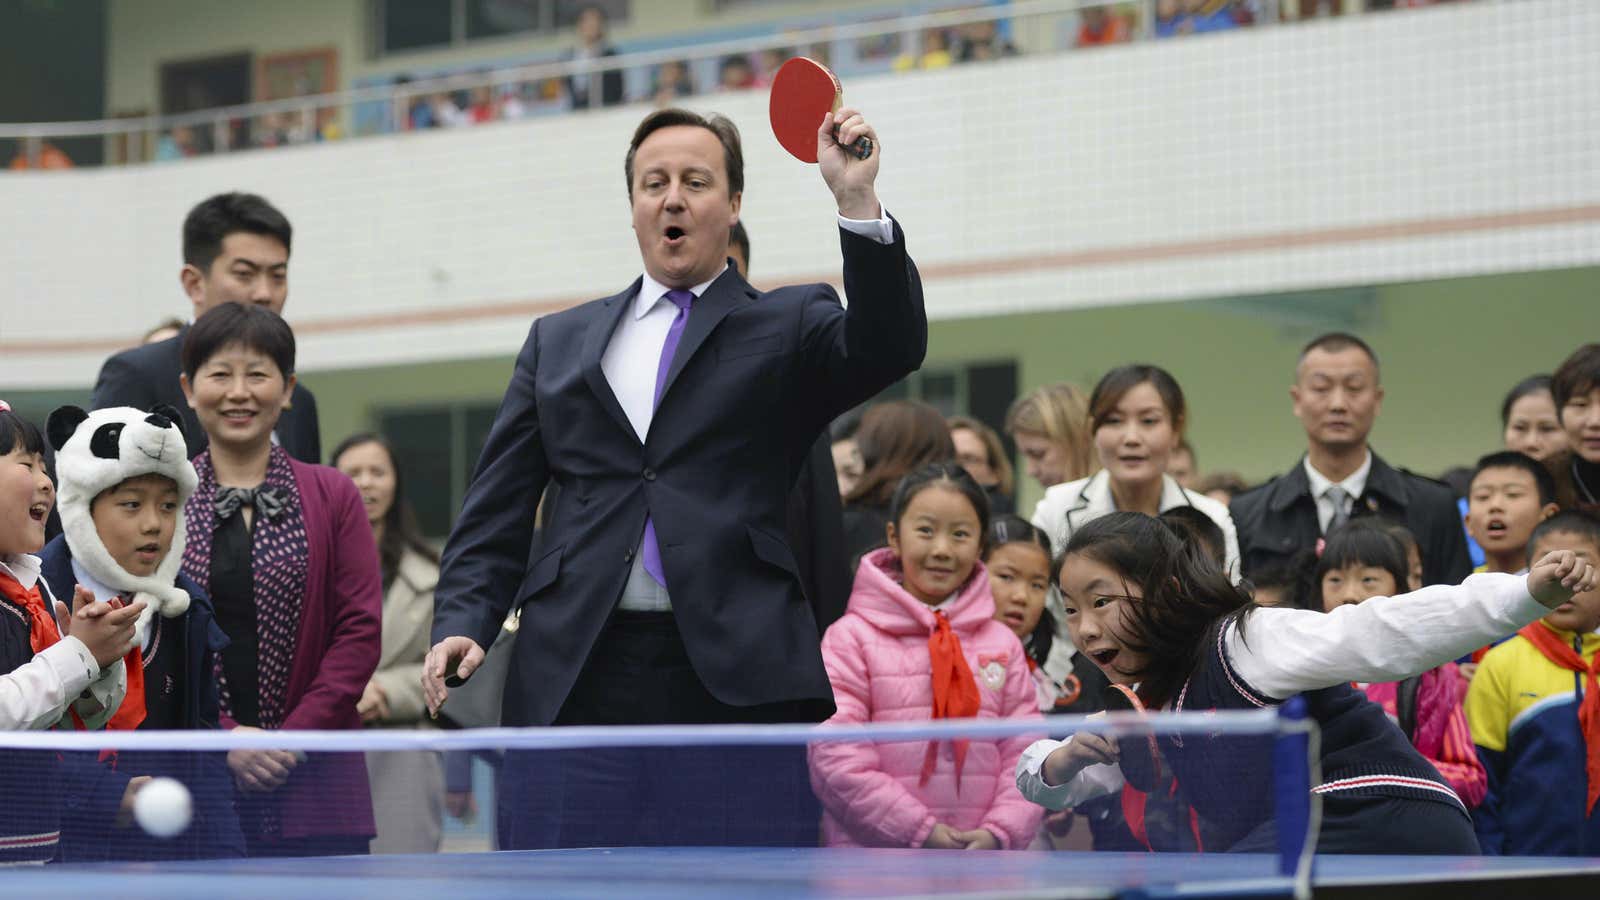 David Cameron plays ping pong with primary school kids during his trip to Chengdu.